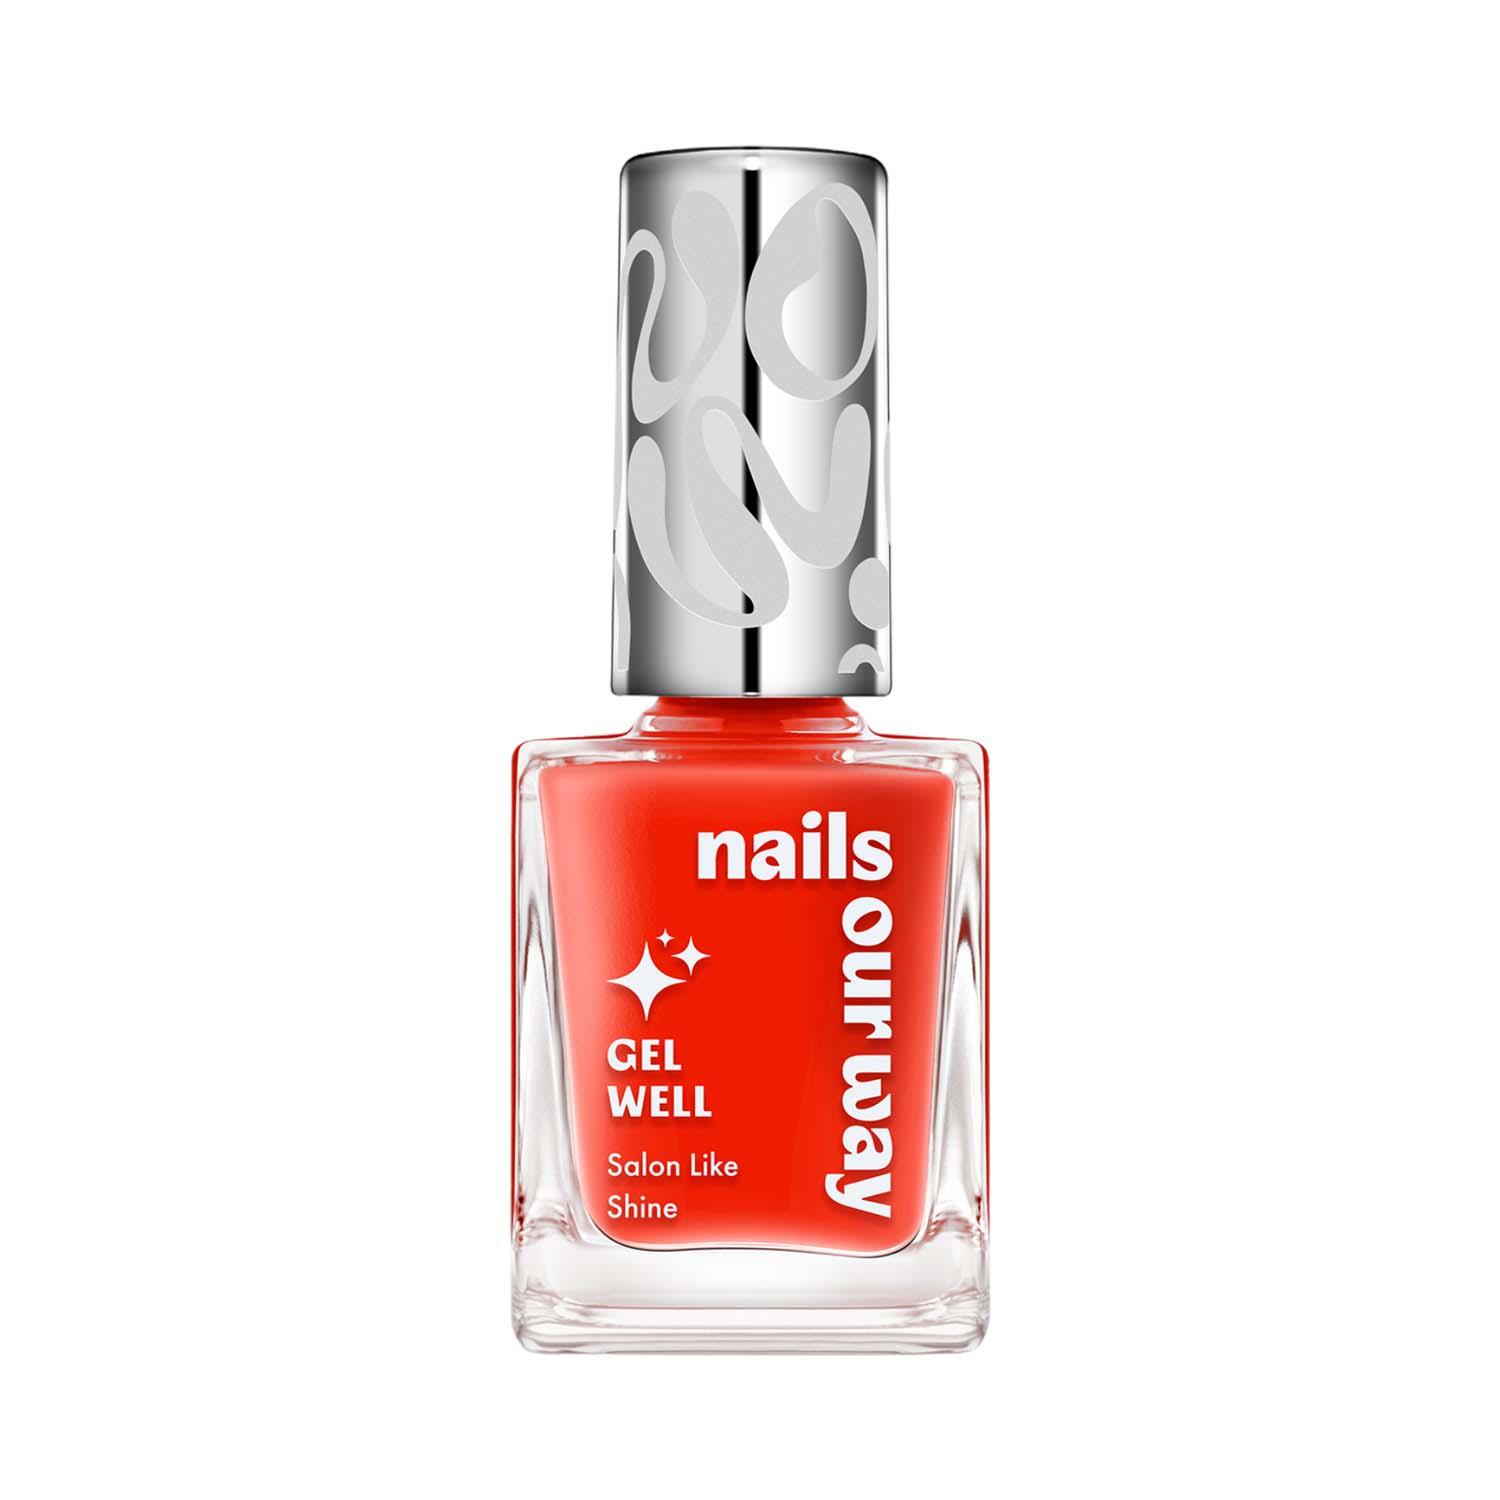 Nails Our Way | Nails Our Way Gel Well Nail Enamel - 101 Saucy (10 ml)